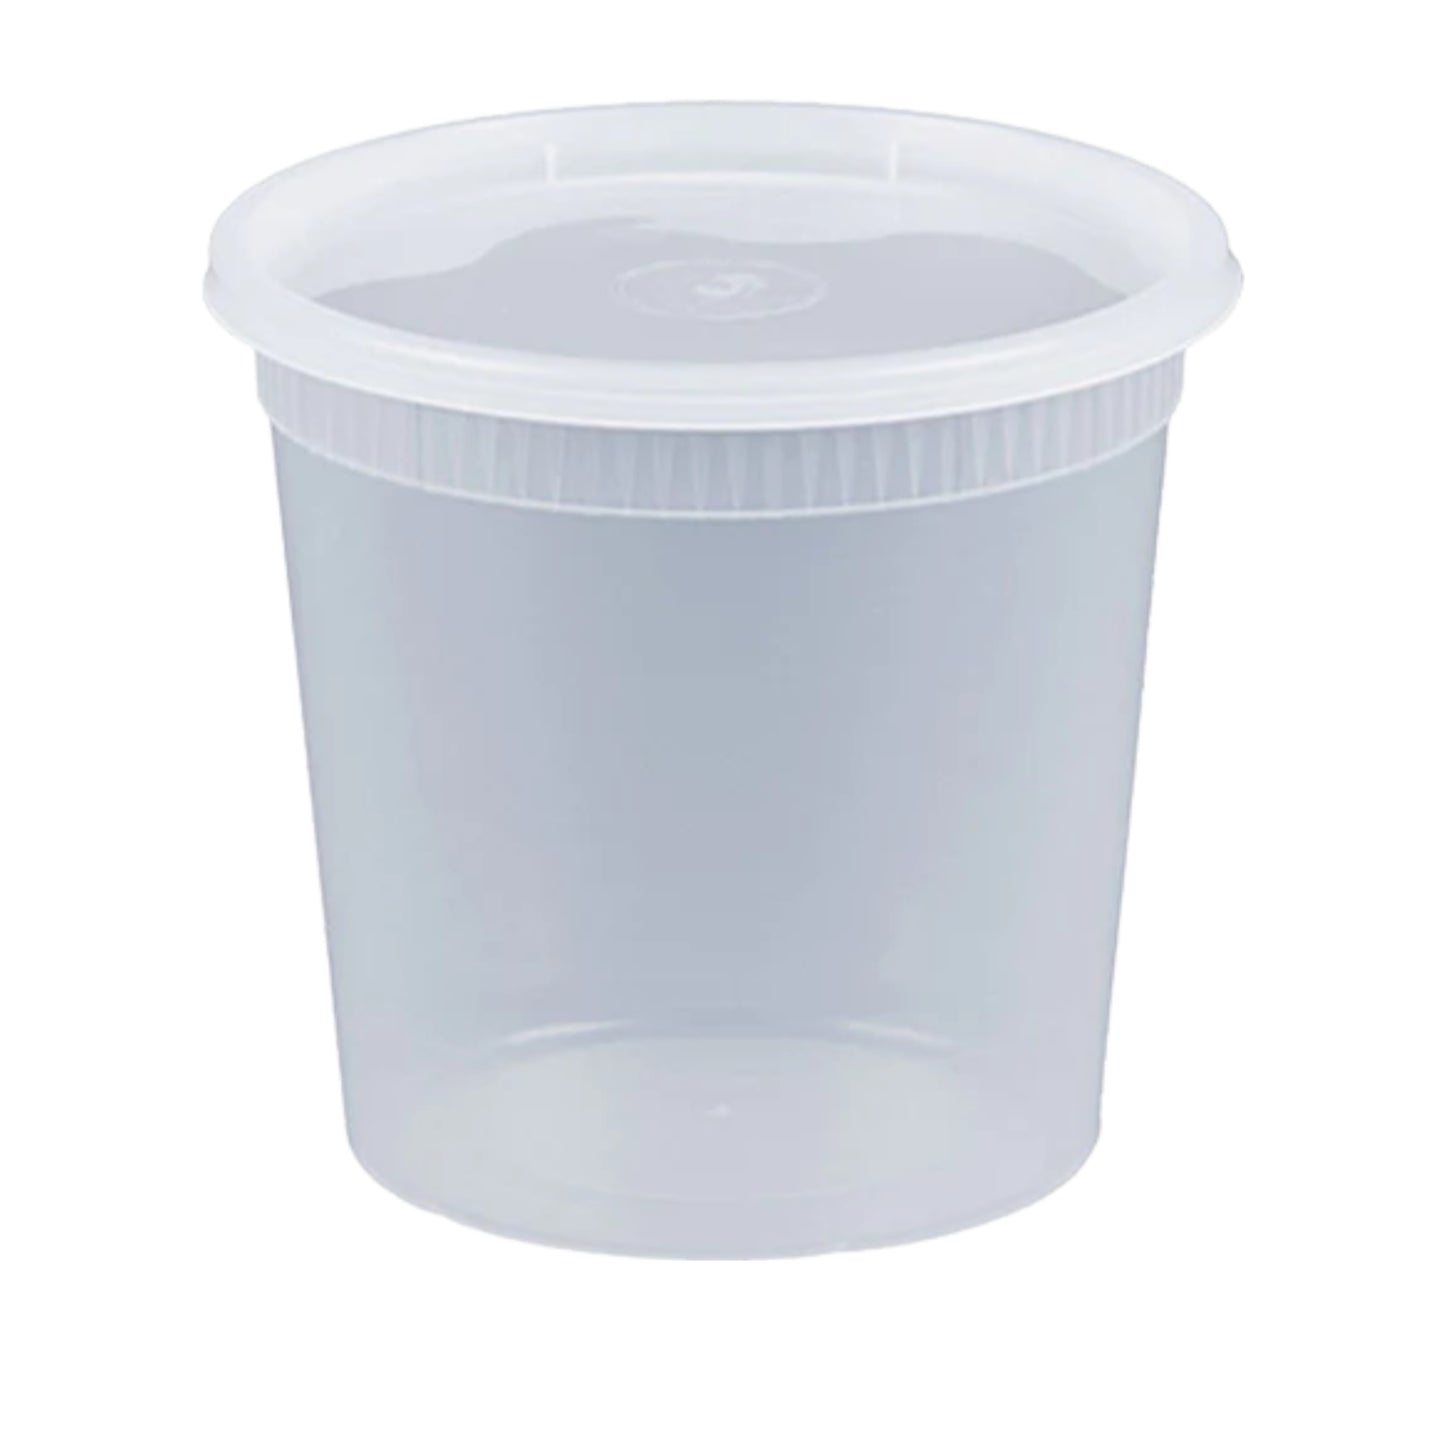 KIS-S32G | 240sets 32oz, 946ml Clear Plastic Deli Containers and Lids Combo; $0.233/set